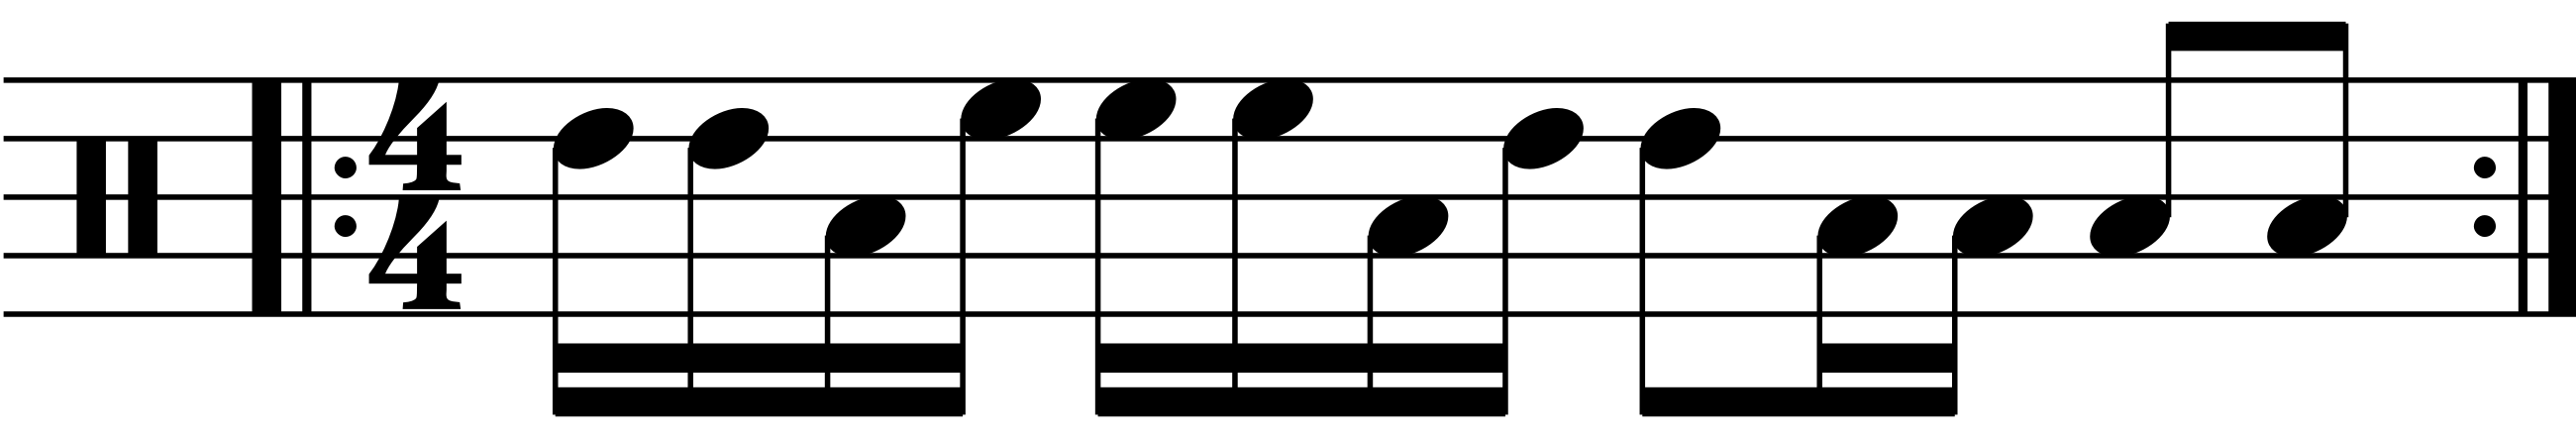 A free fill consctuction idea using the base rhythm